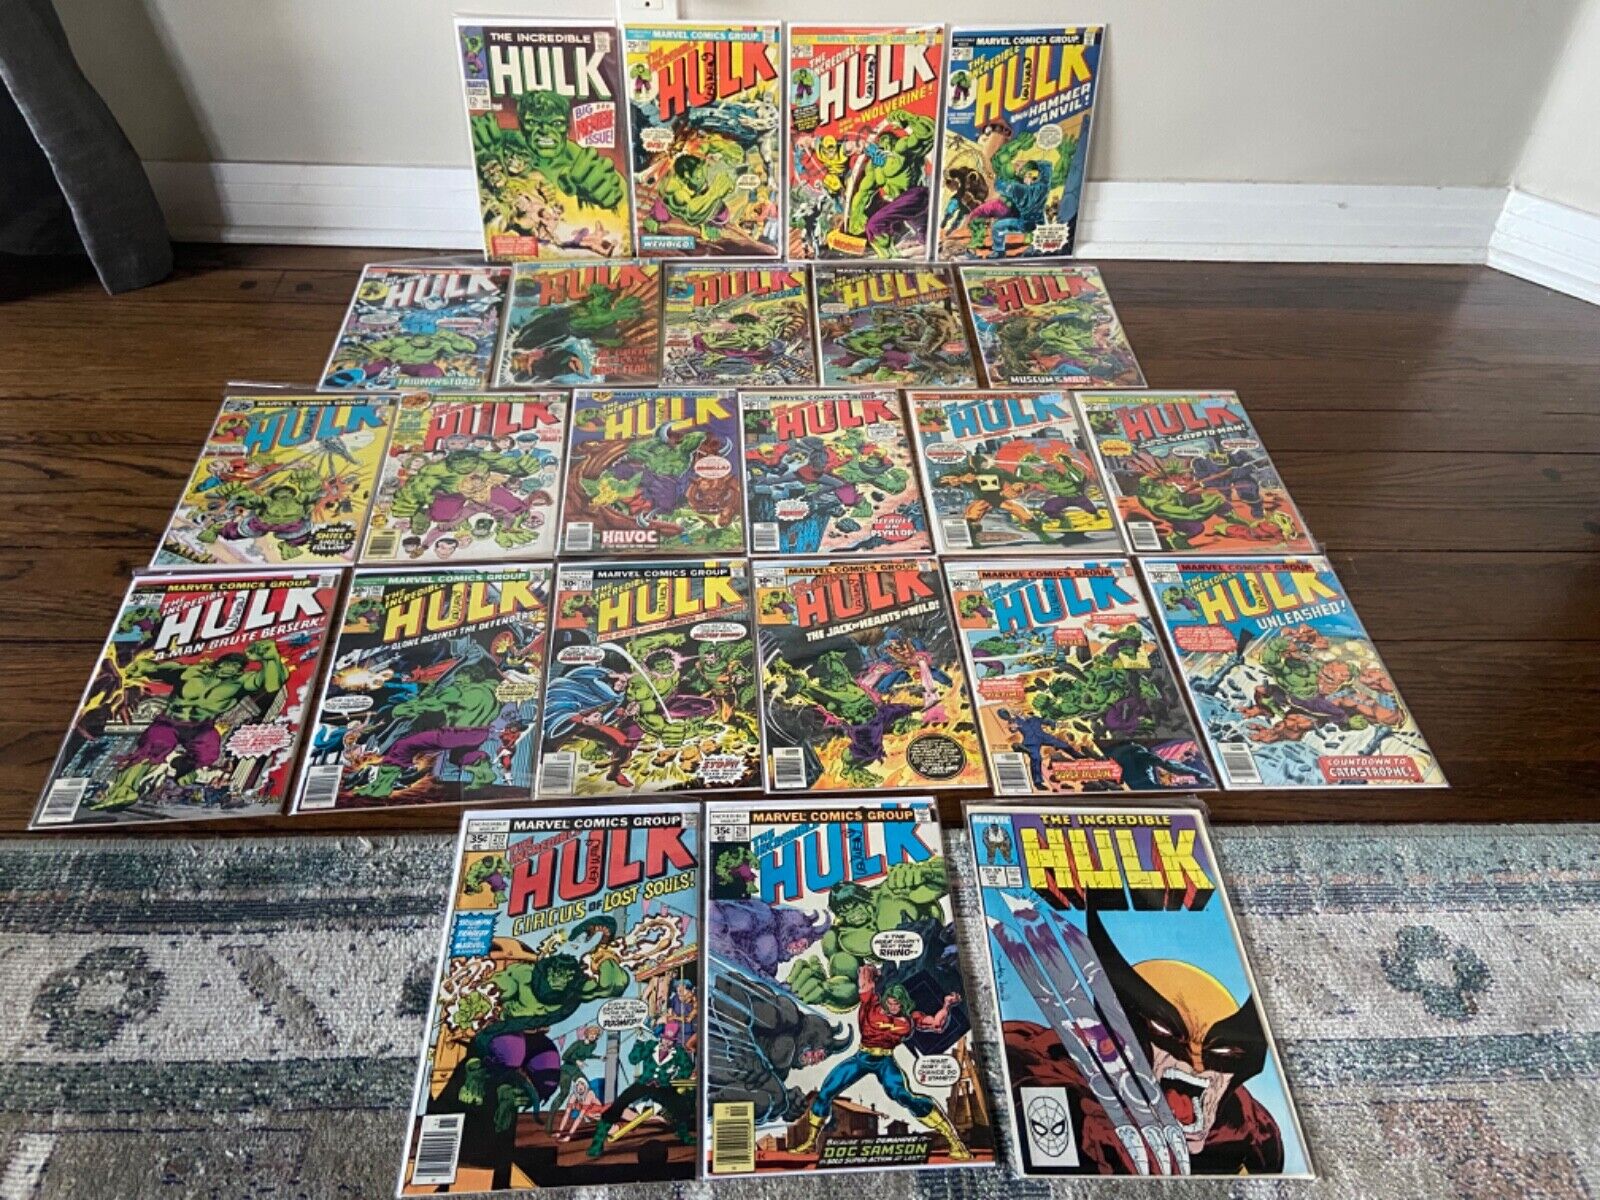 RARE INCREDIBLE HULK 102340 KEY ISSUES 180 181 182 WOLVERINE SIGNED LEN WEIN